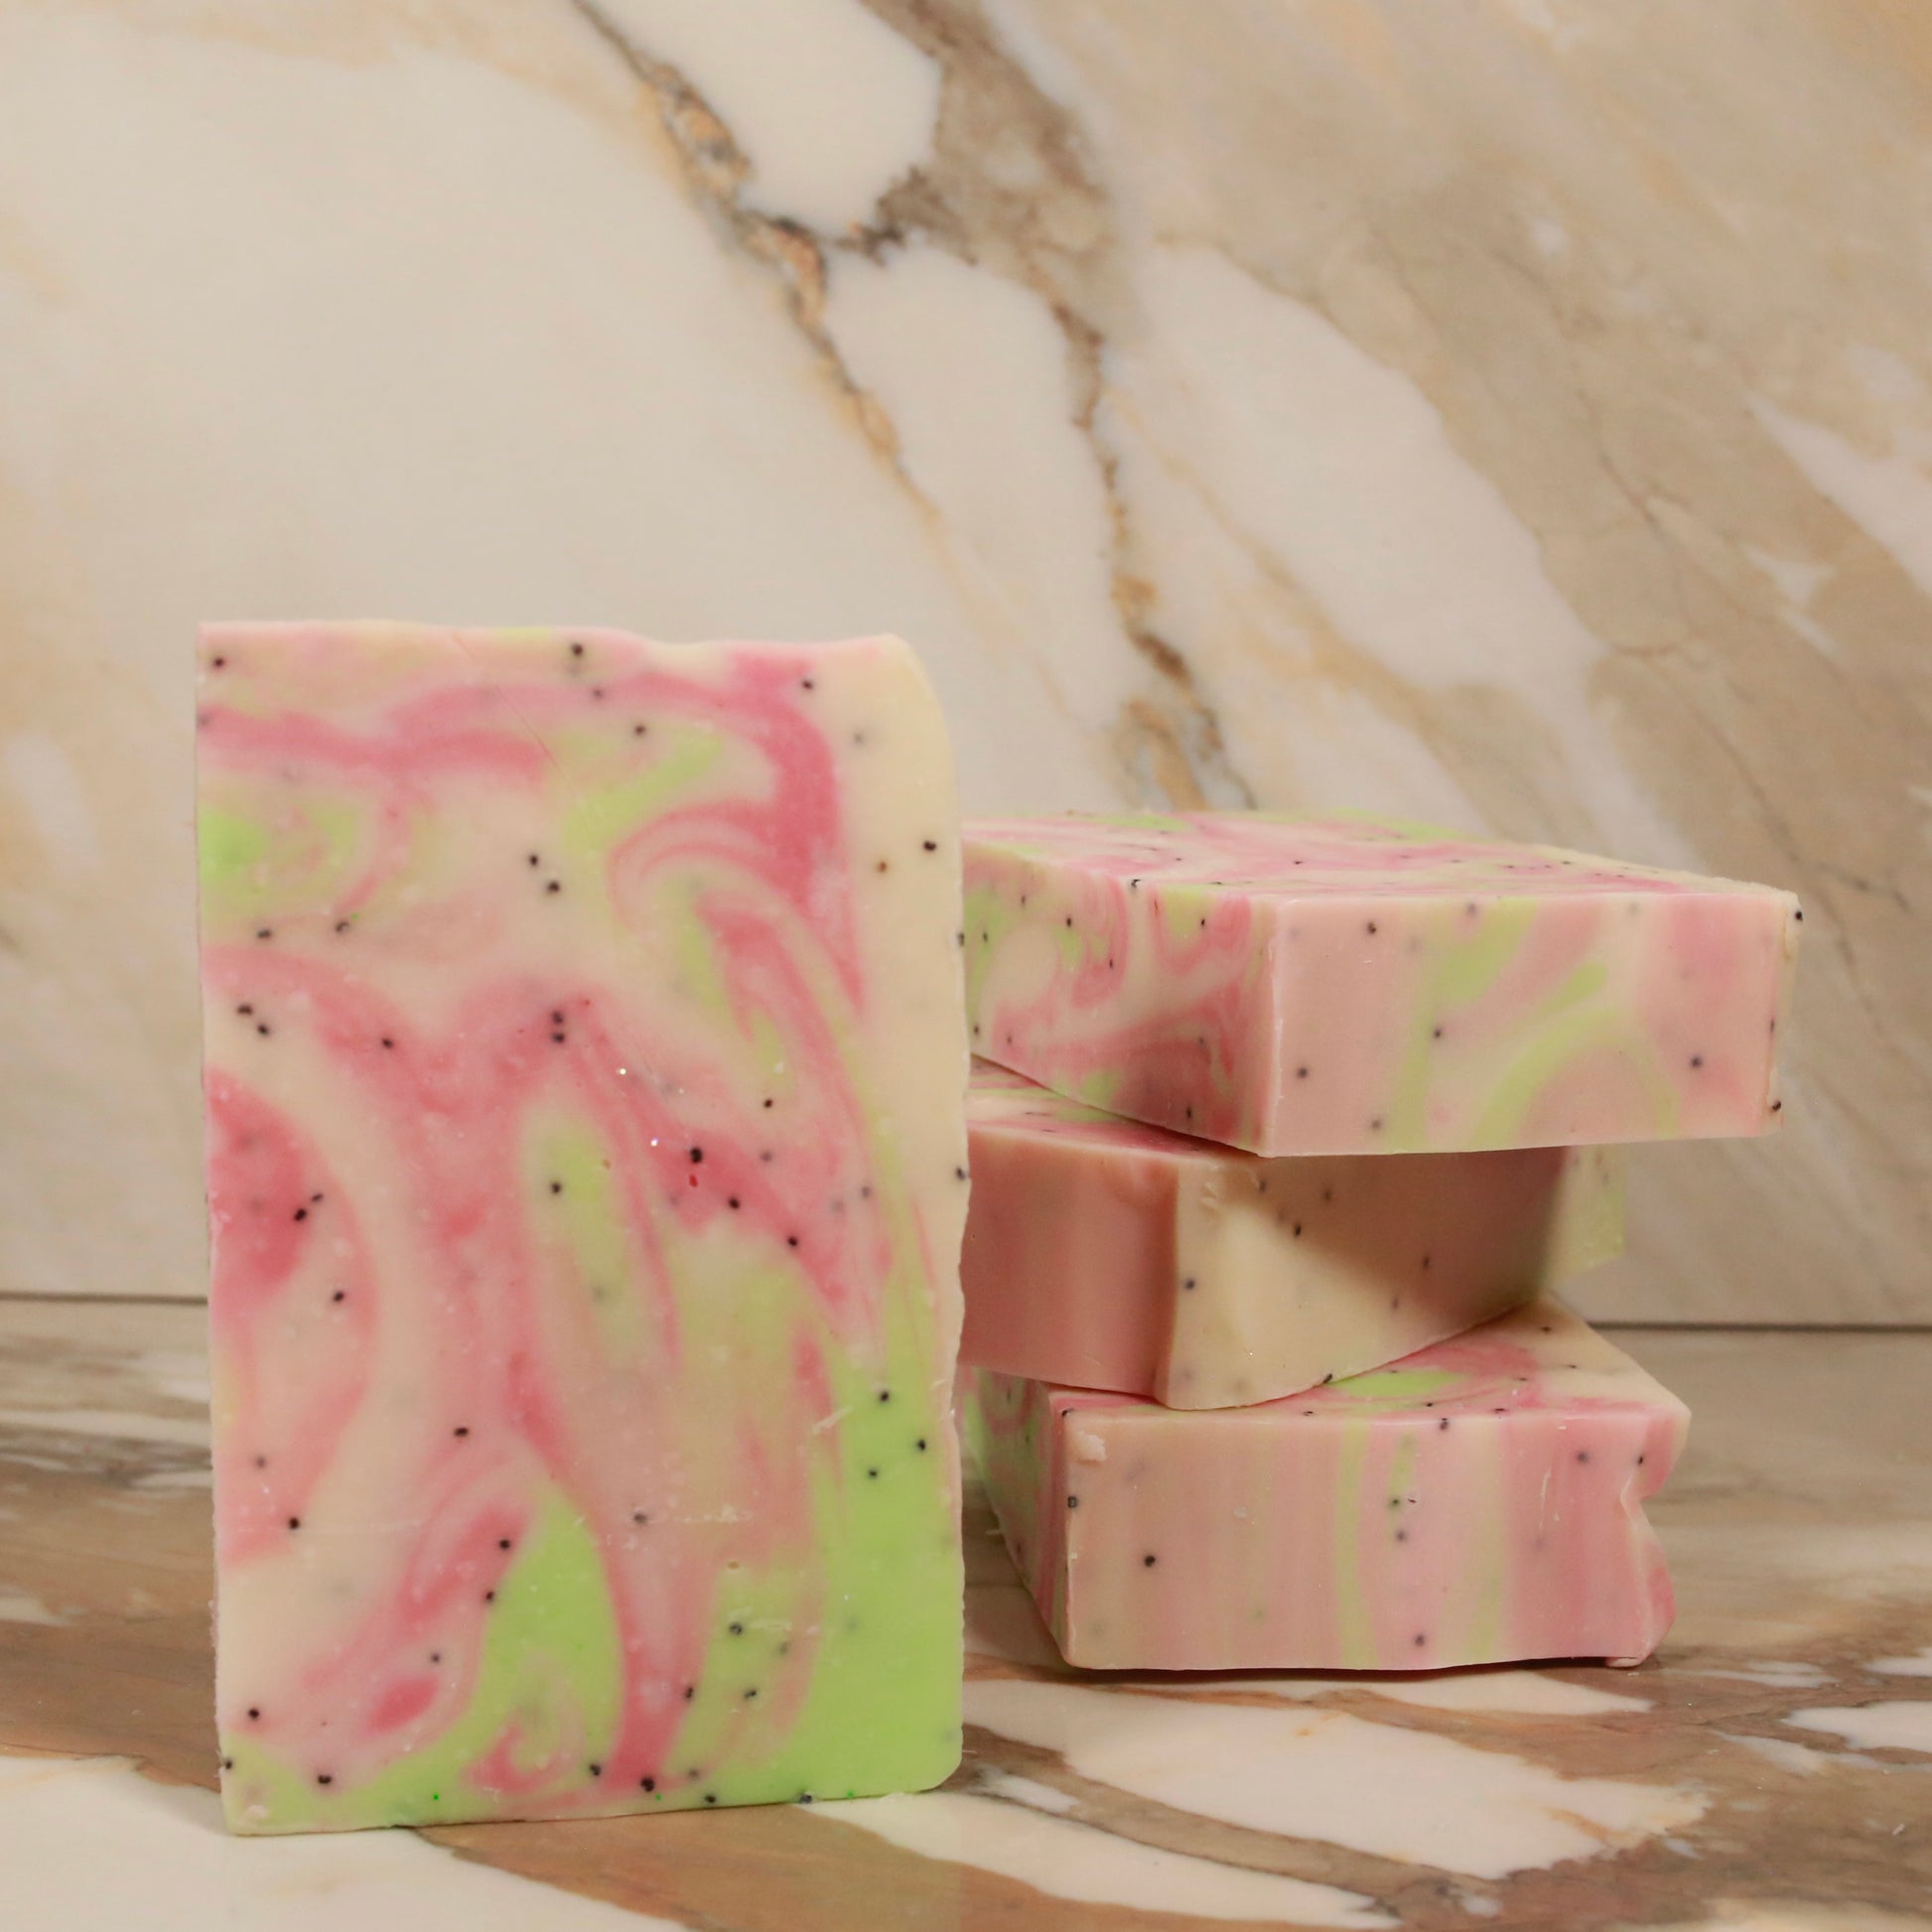 soap that smells like watermelon